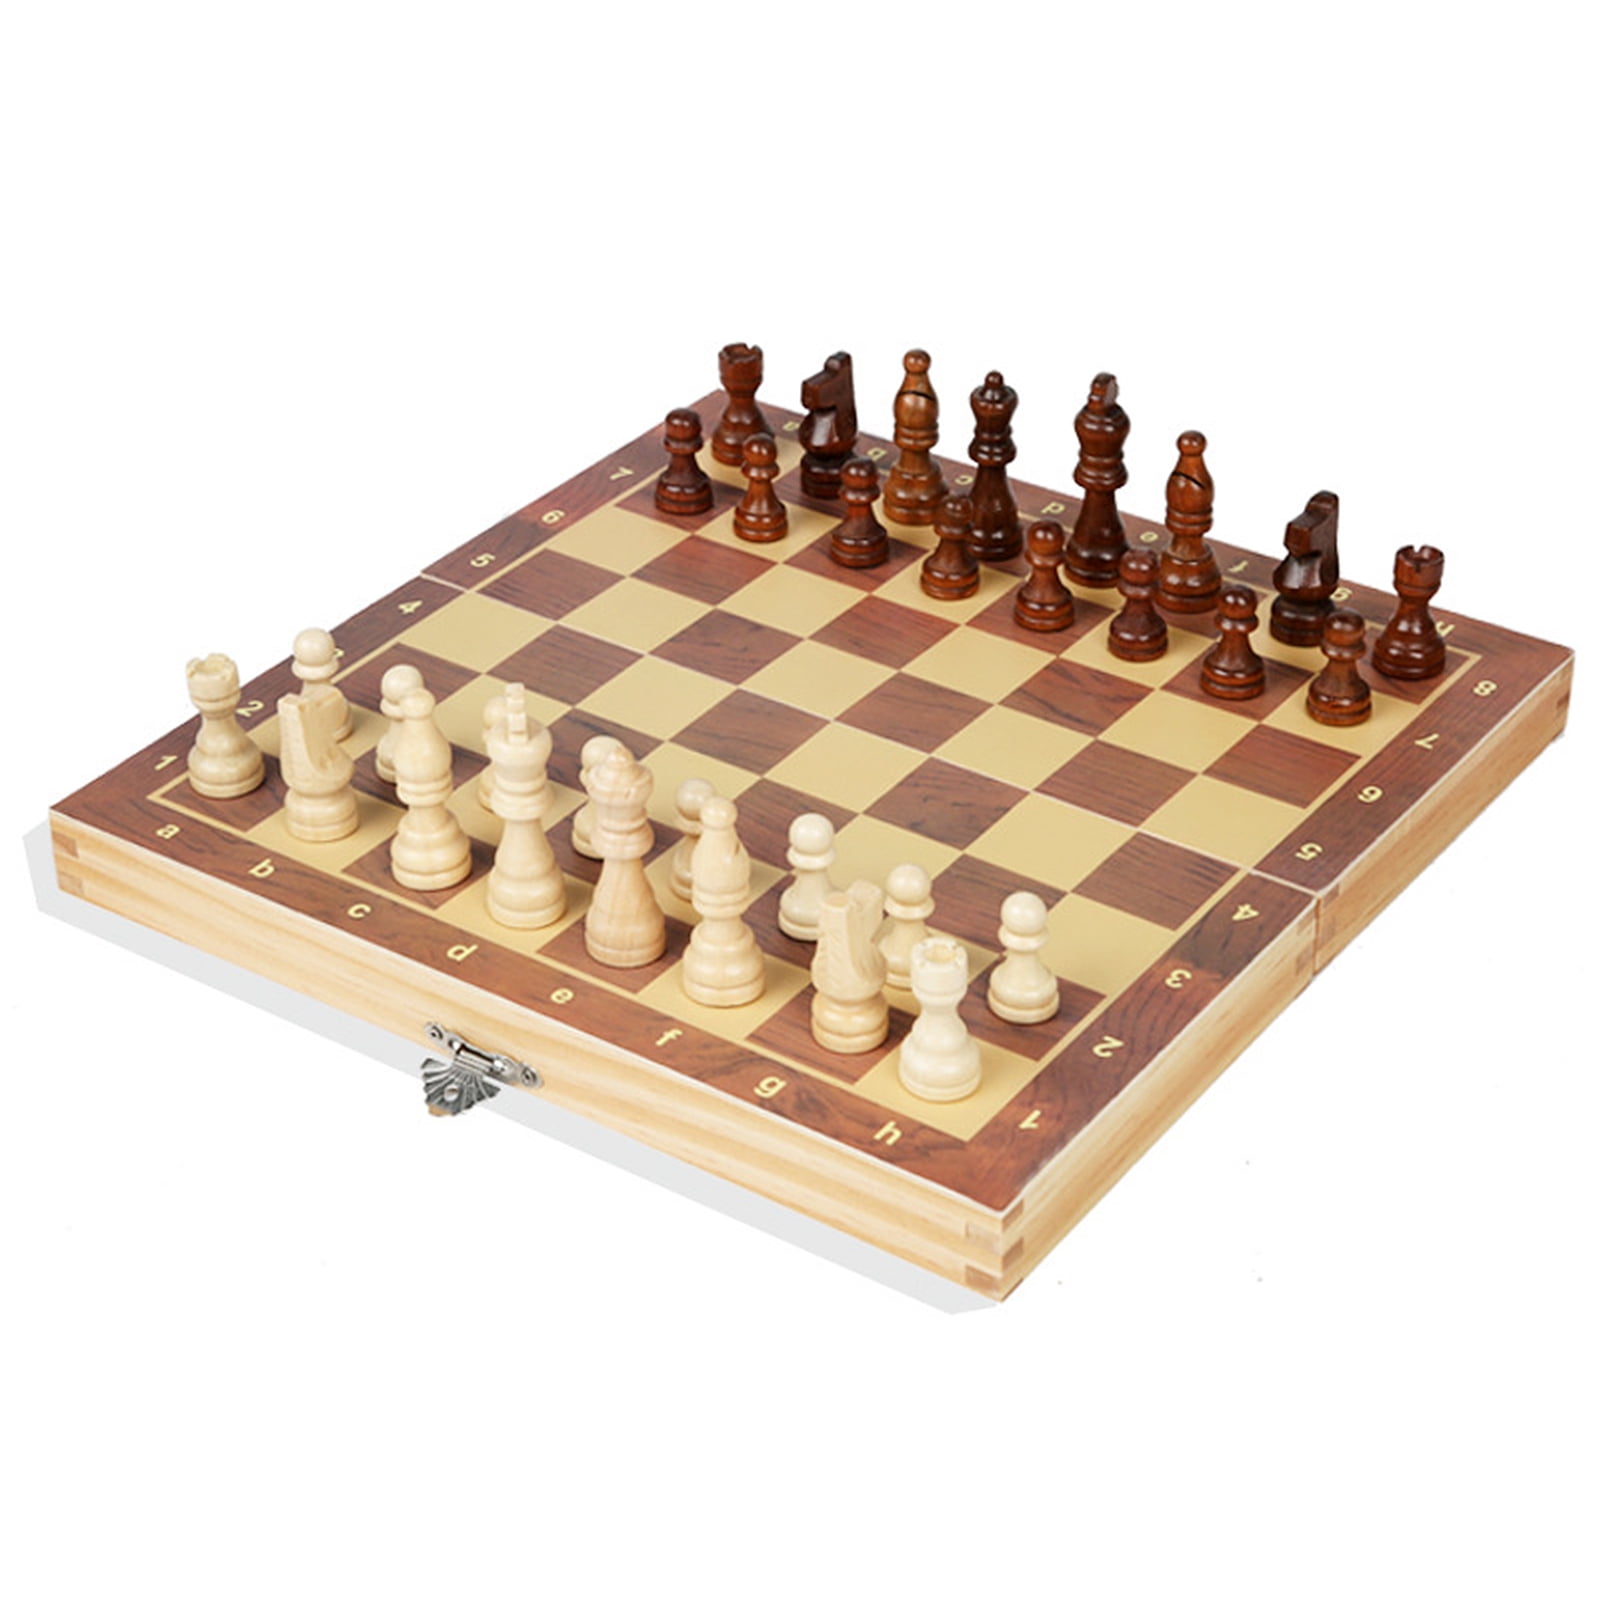 12" folding wooden magnetic travel chess set MAGNET LOCK FREE EXPRESS SHIPPING 